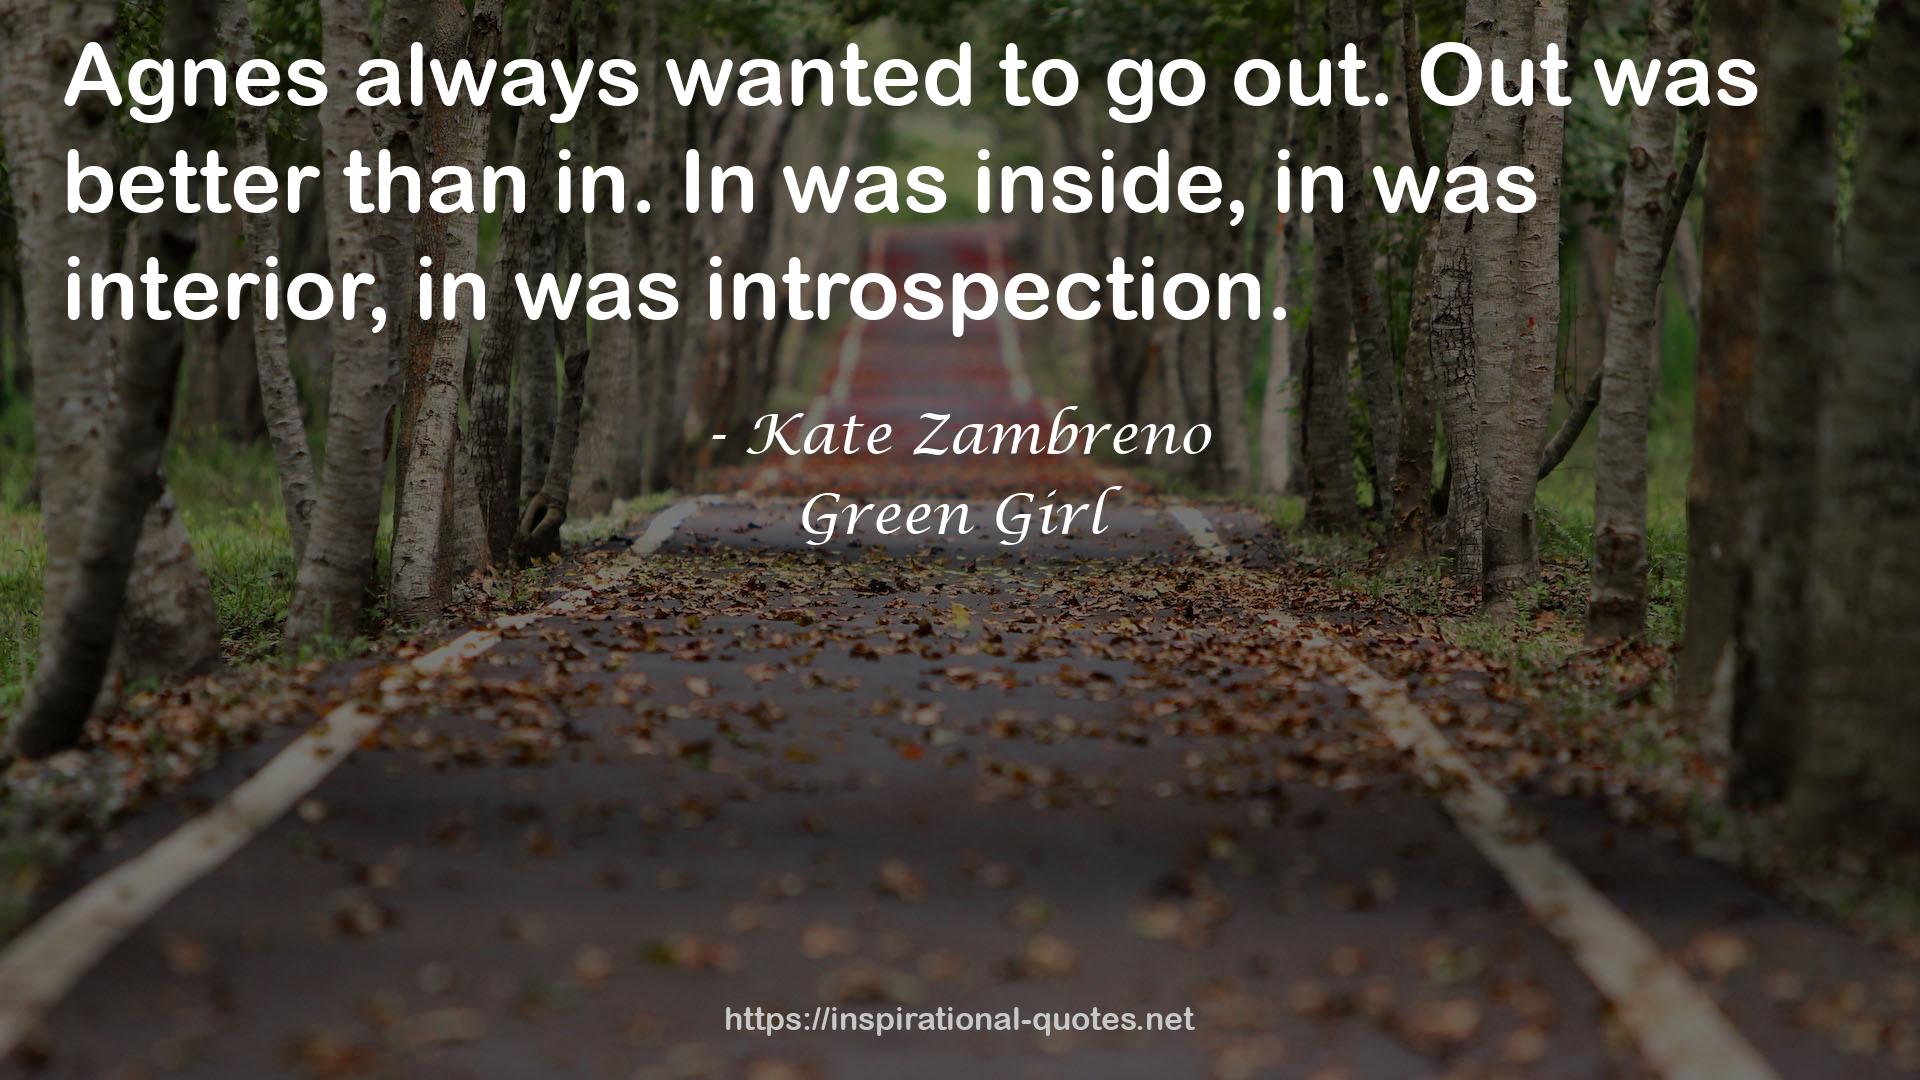 Green Girl QUOTES